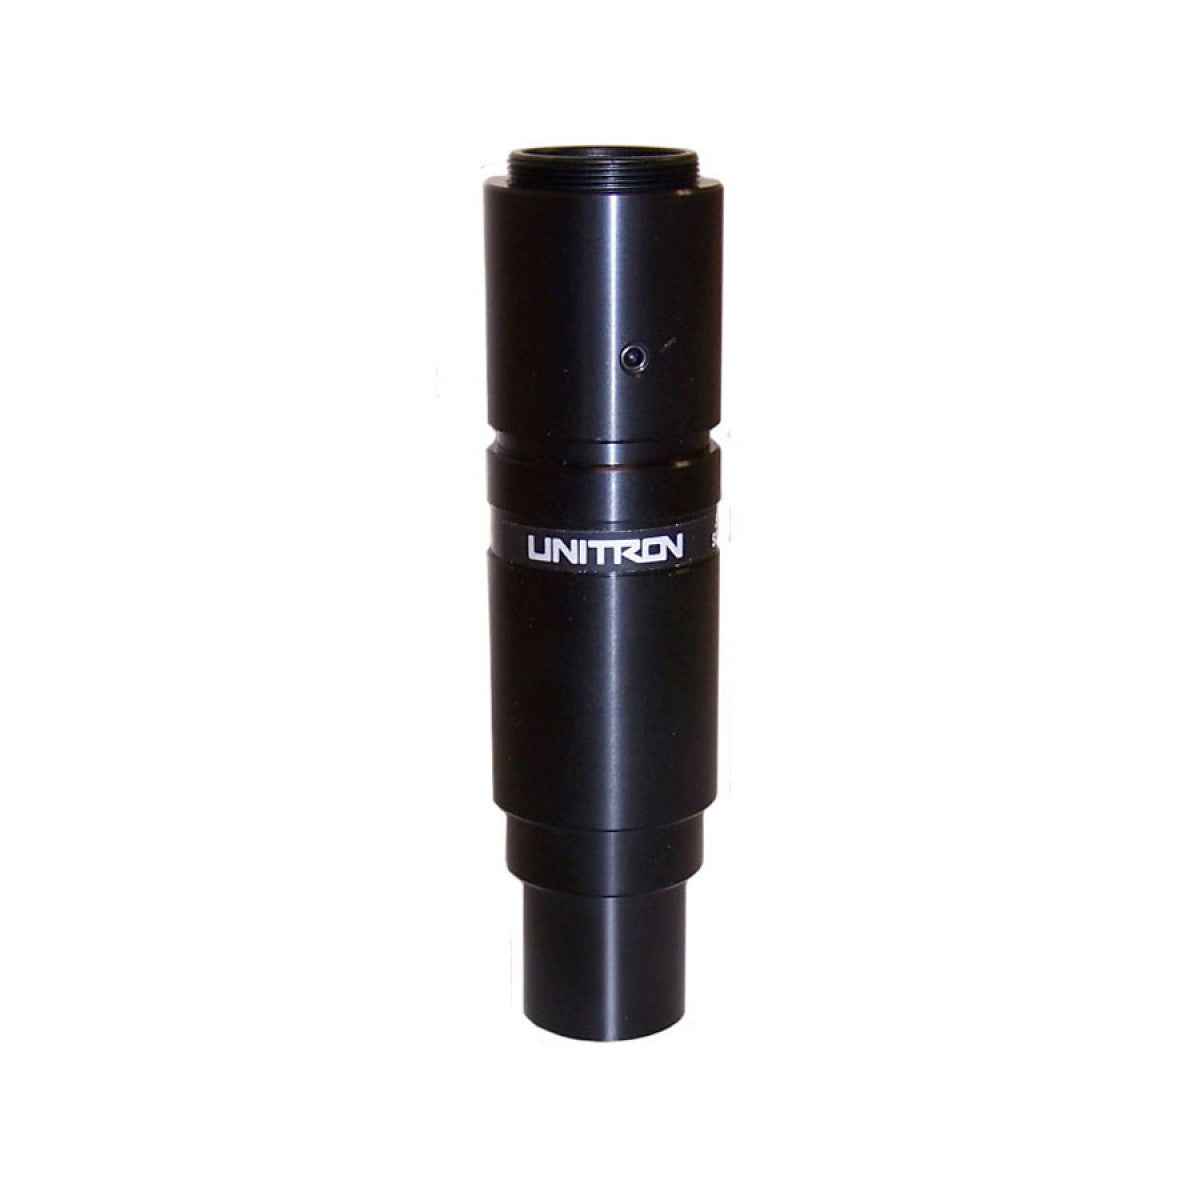 Camera and Video Adapter for Unitron 12100 Pol Scope Series